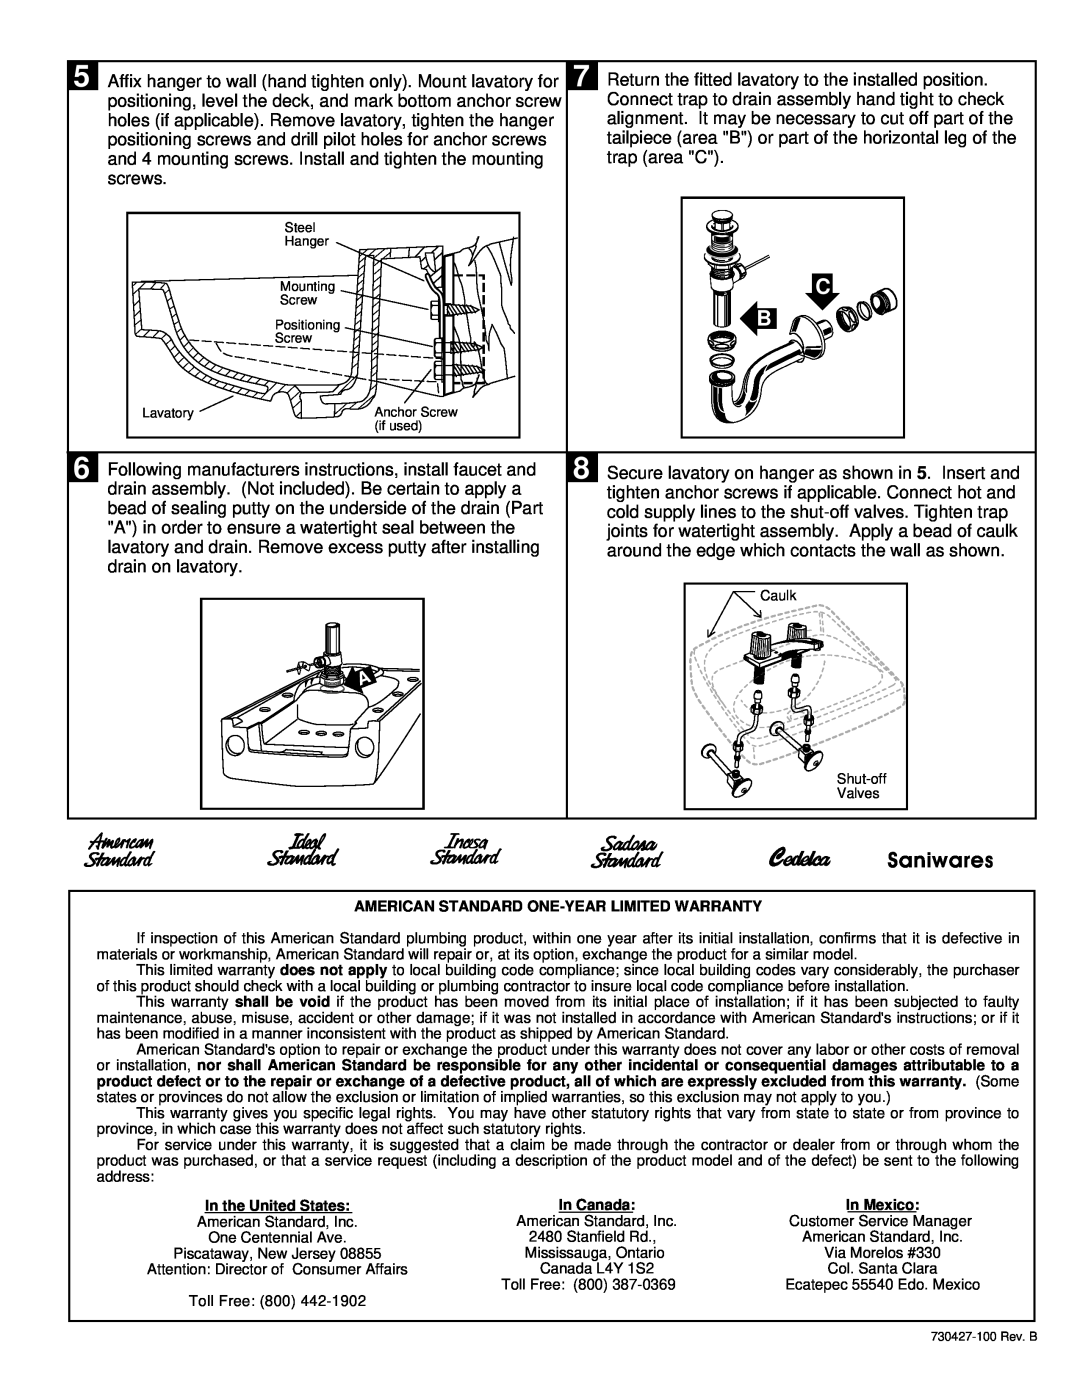 American Standard none installation instructions Saniwares 